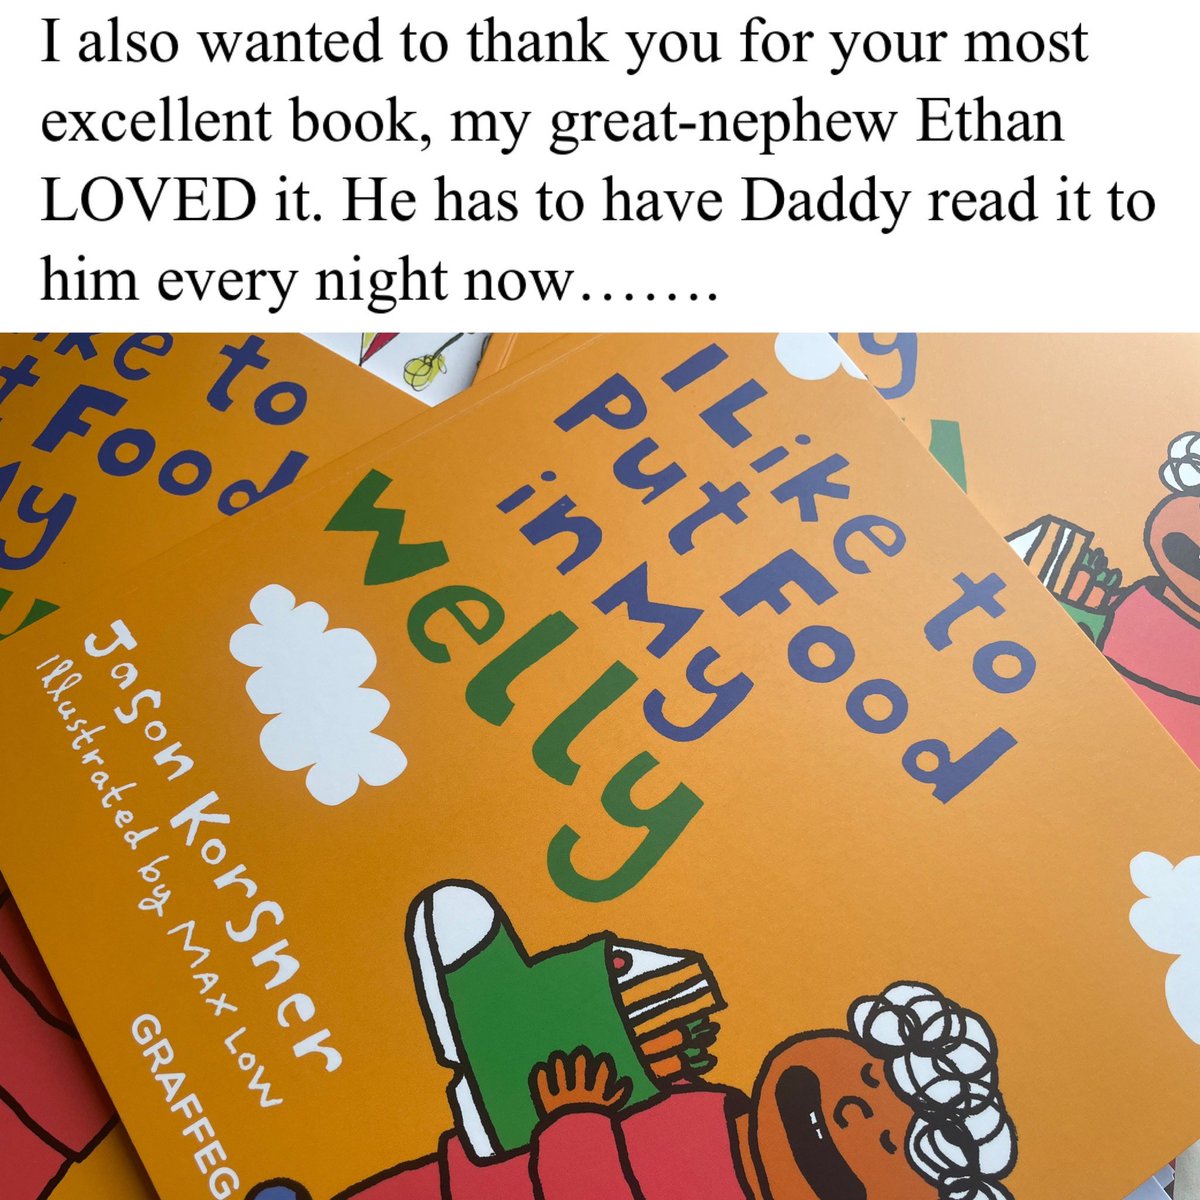 A second piece of feedback in a week - please do keep them coming! They’re greatly appreciated!
It’s so gratifying to hear that young readers are enjoying my books.
That’s why I write them!

#ILikeToPutFoodInMyWelly #childrensbooks #kidsbooks @graffeg_books @themaxlow